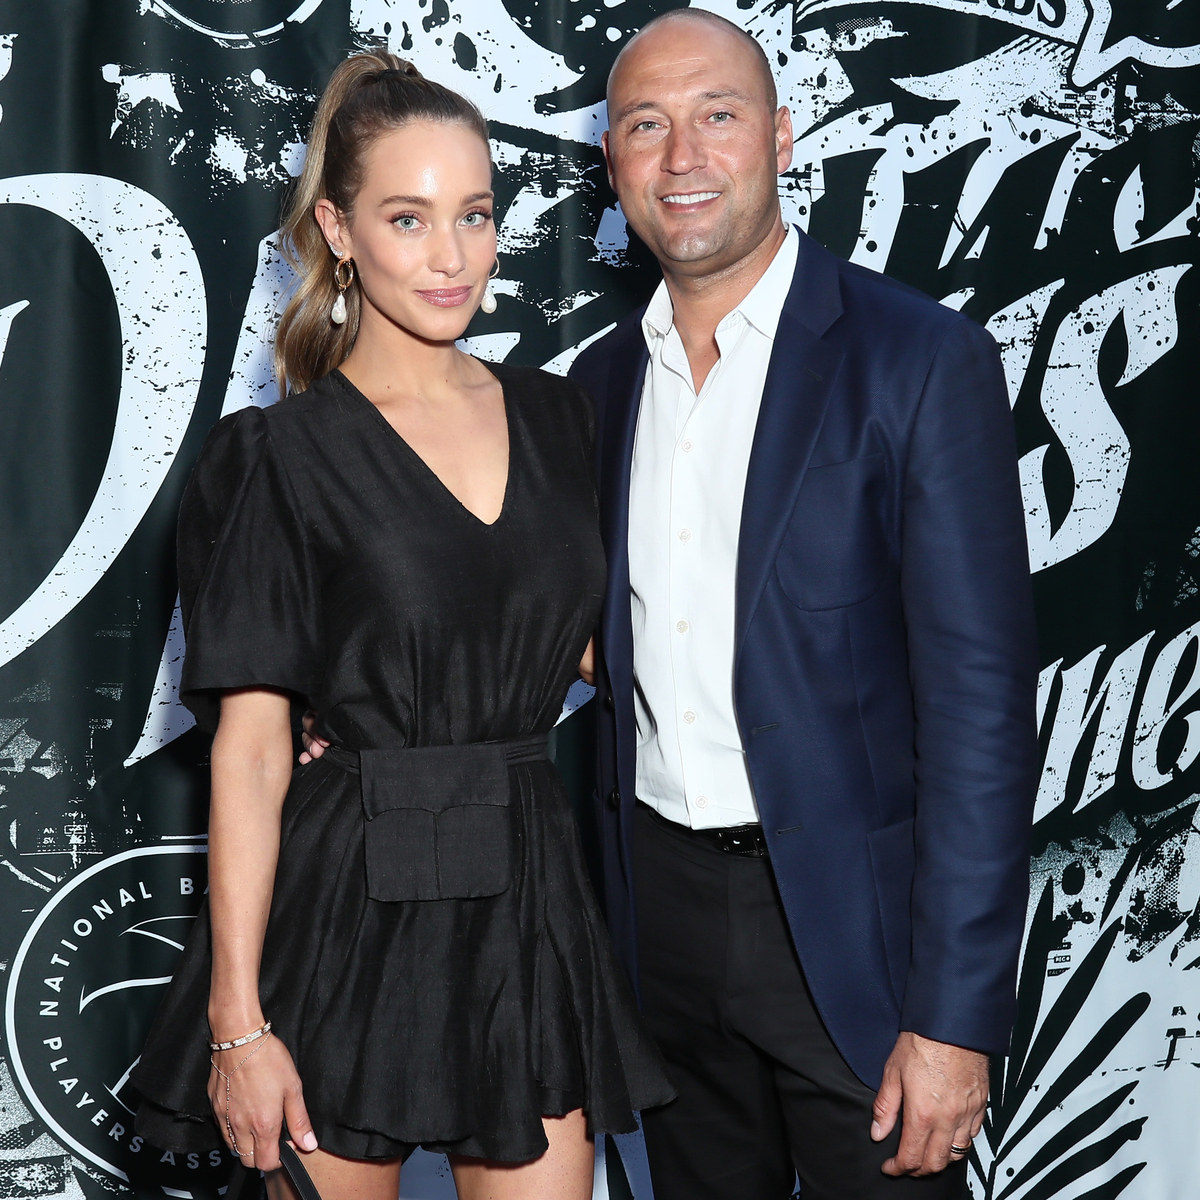 Derek Jeter's close friend once revealed the NY Yankees legend's